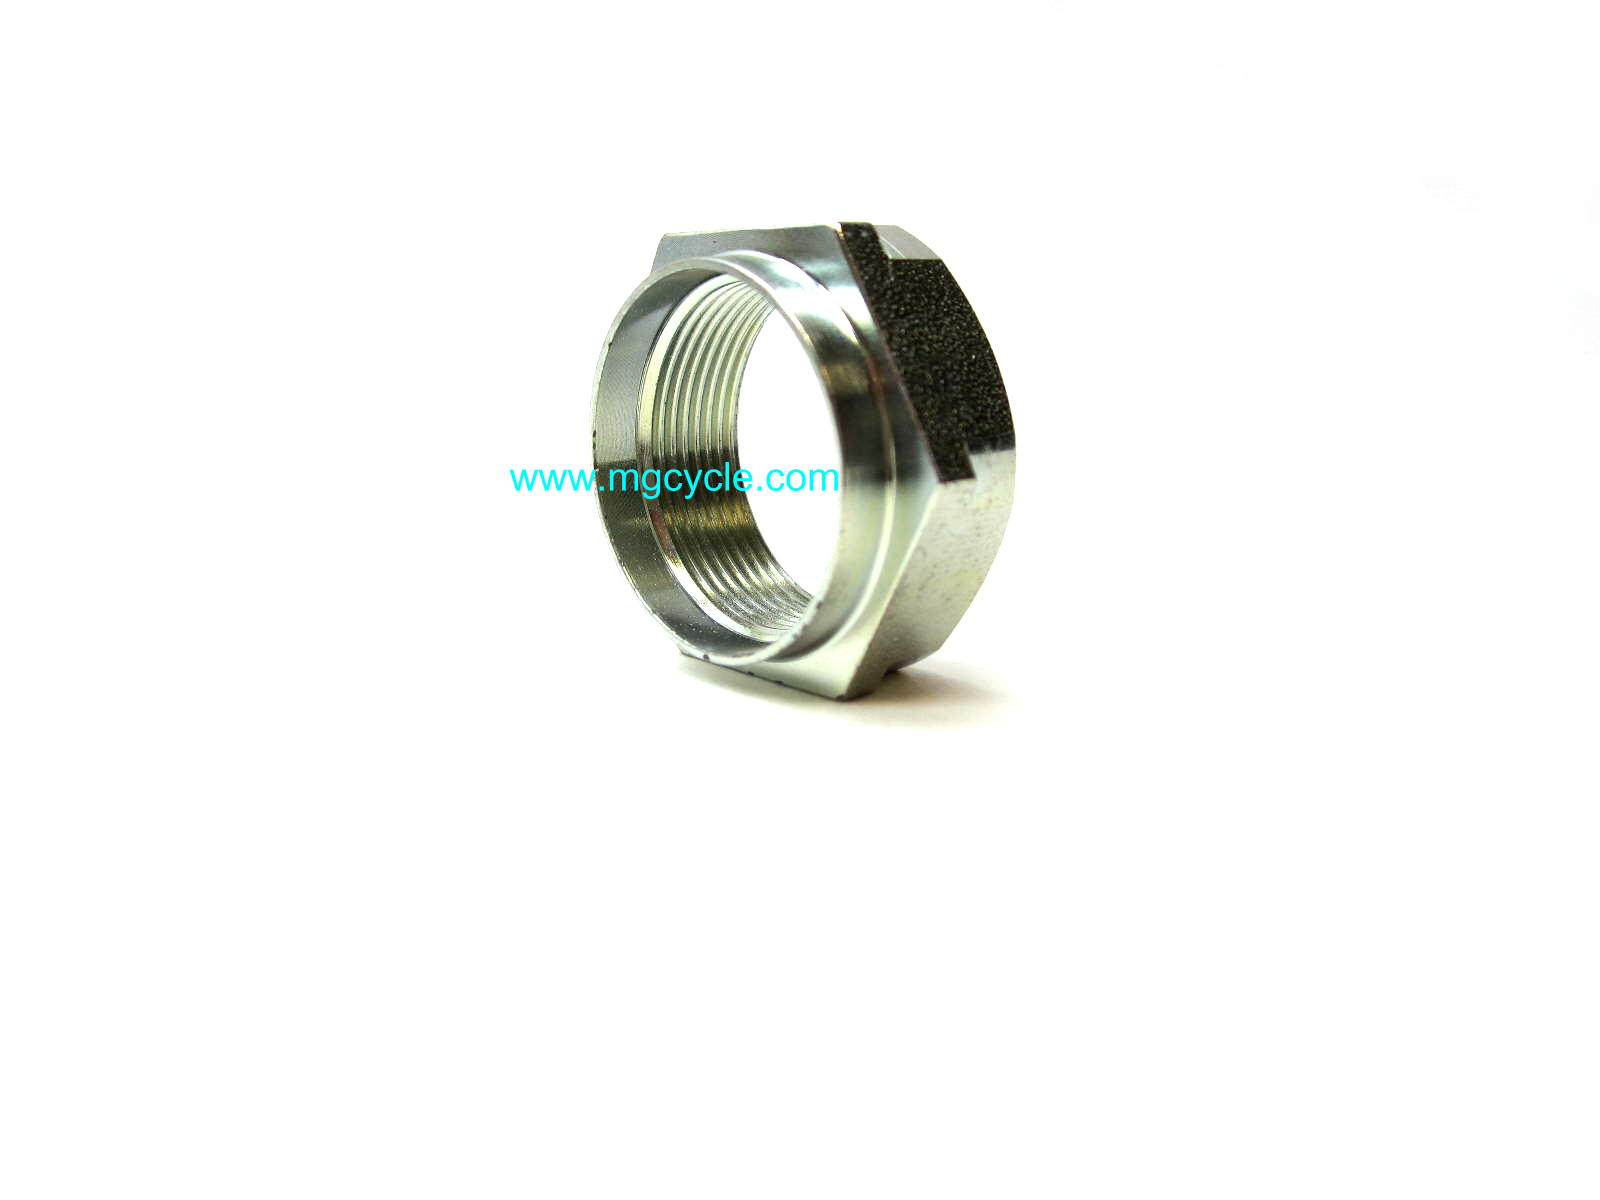 Output shaft securing nut can be used on input shaft GU14219310